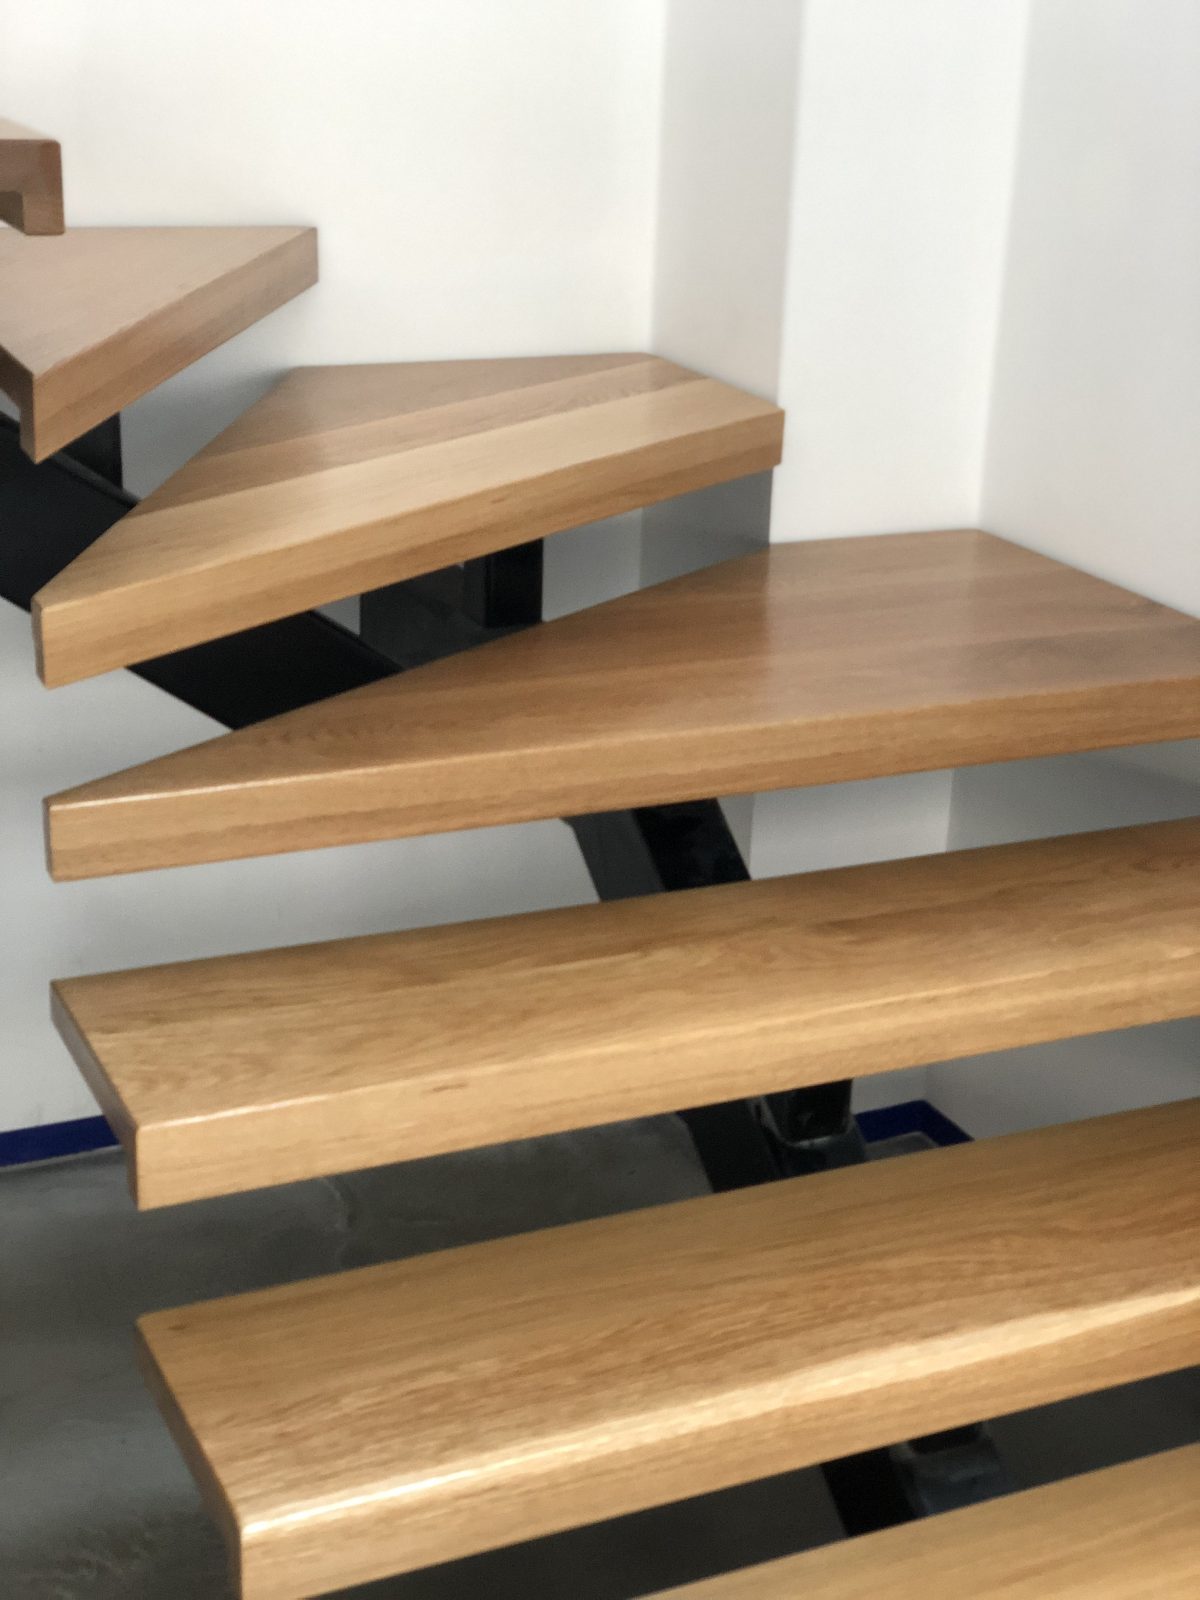 Solid treads supplied and installed to steel spine by Timber Floors Pty Ltd